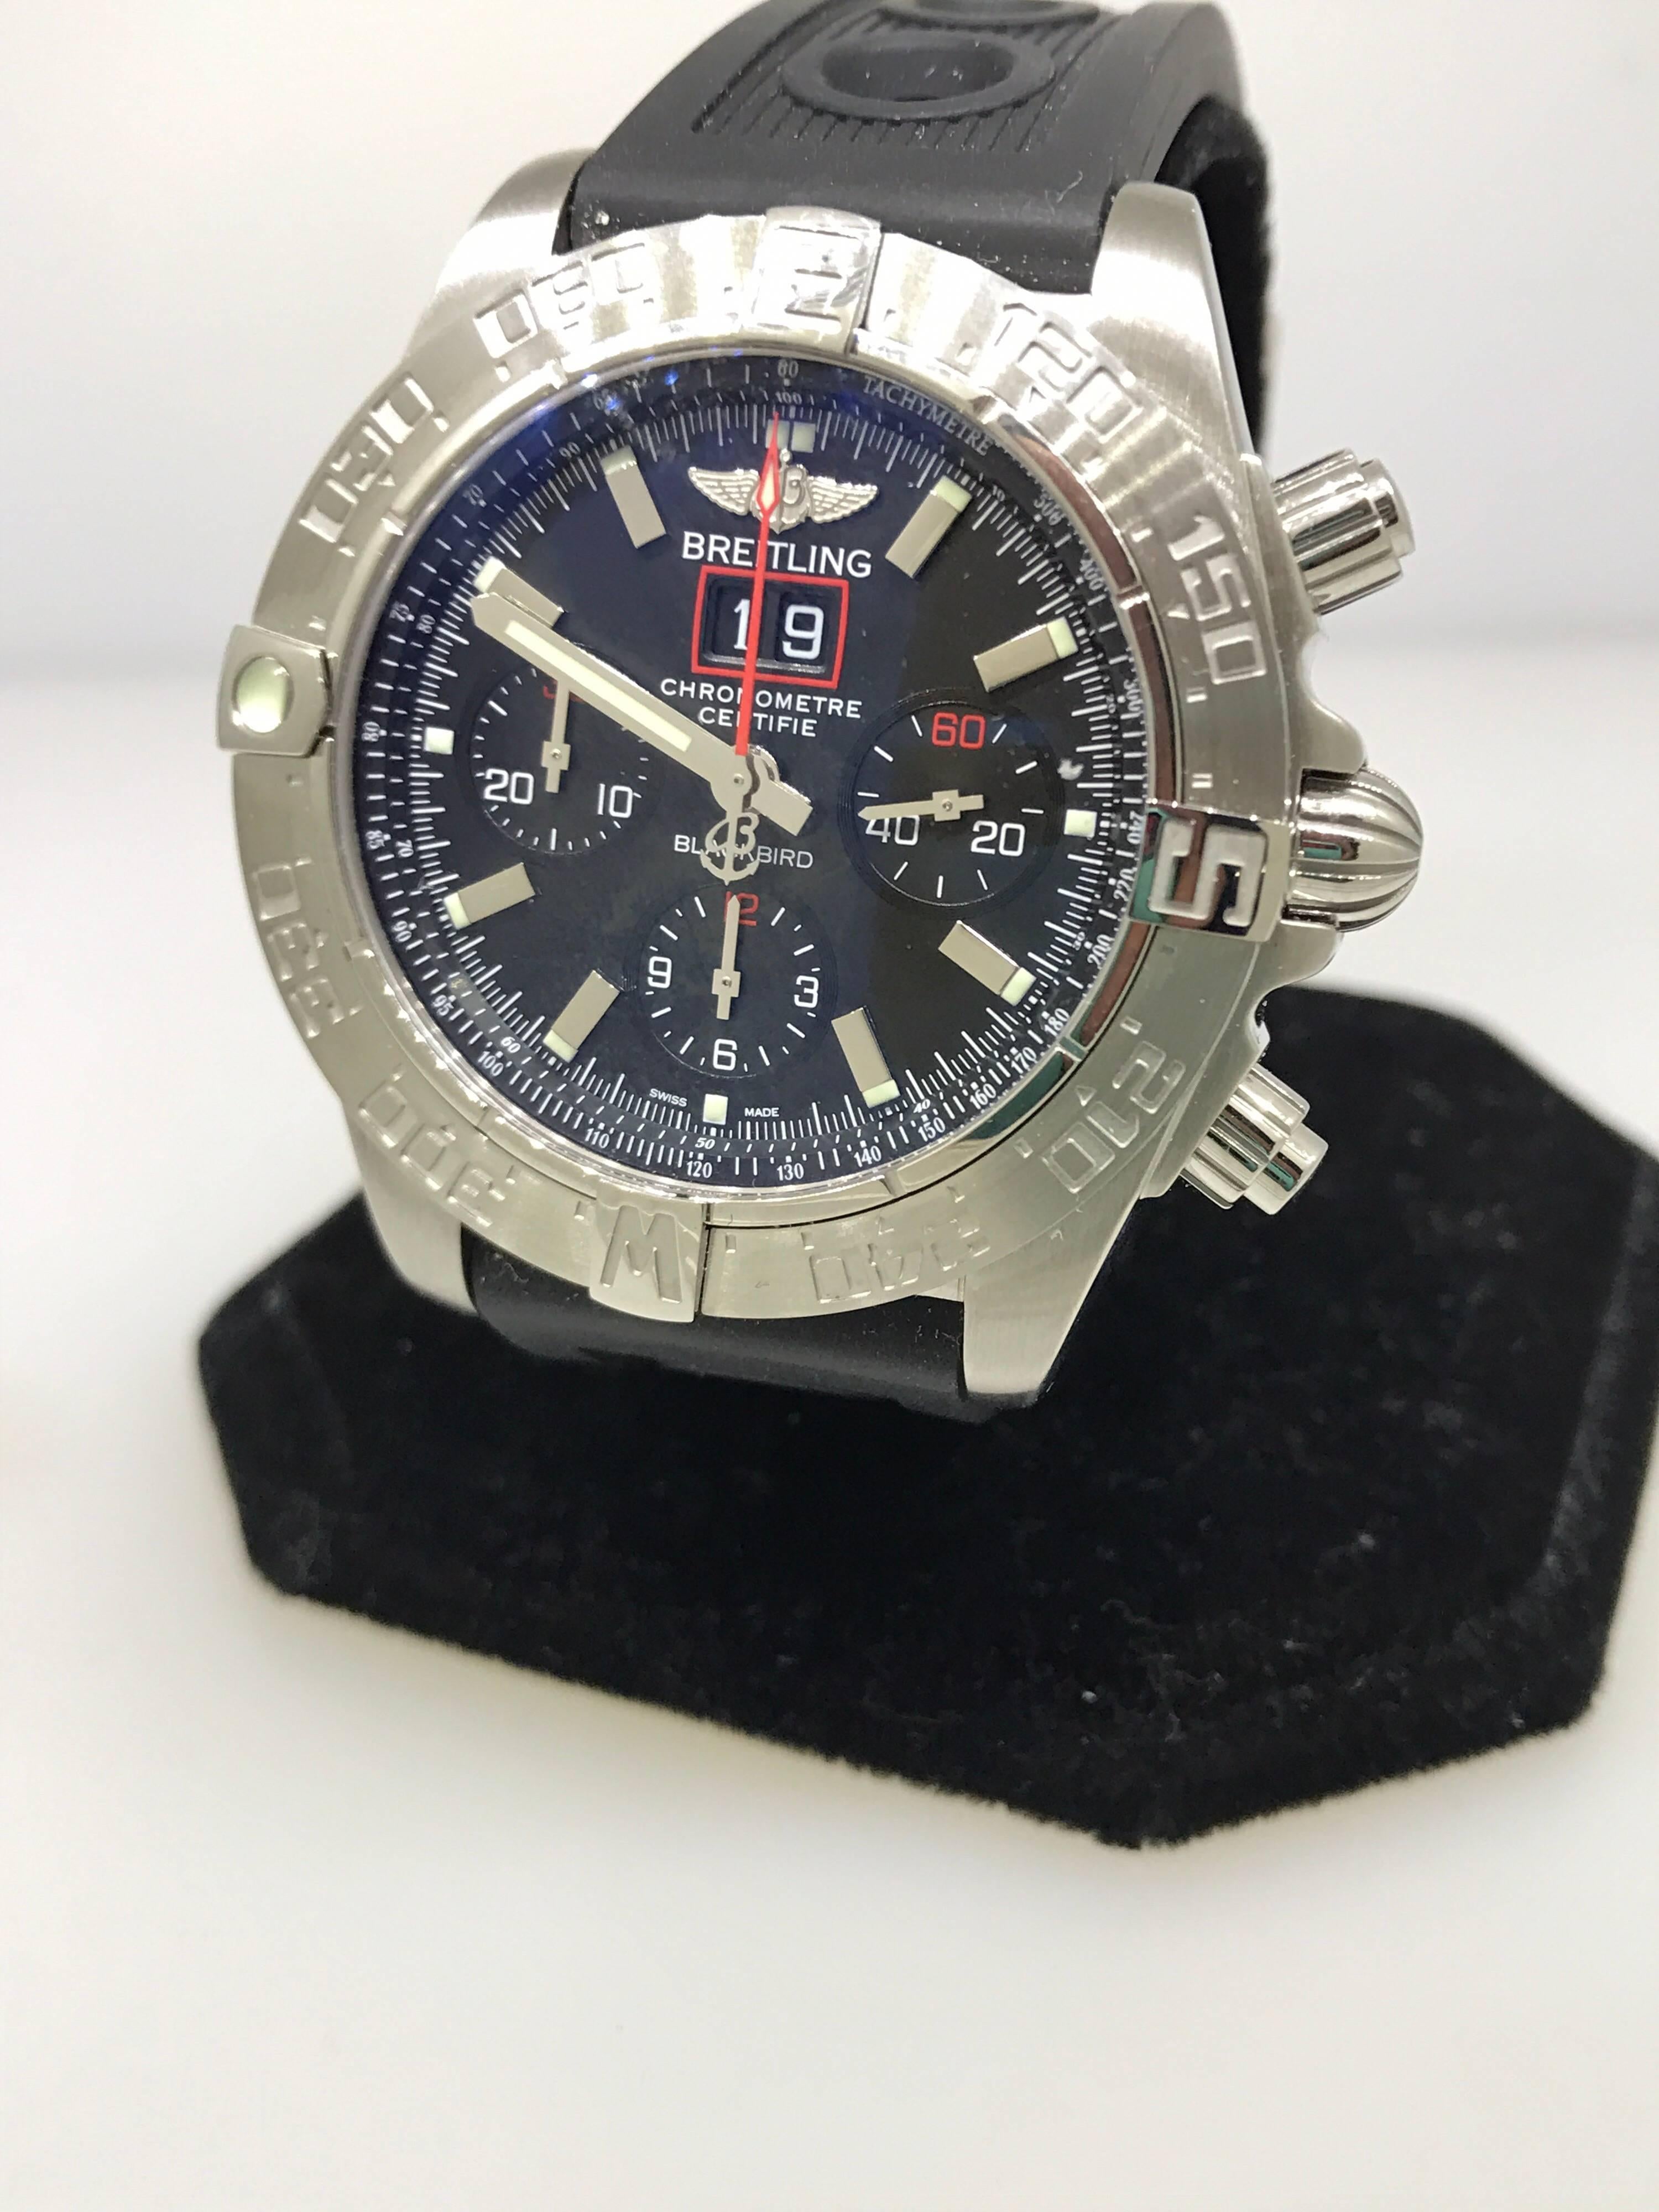 Breitling Chronomat Blackbird Men's Watch

Model Number: A4436010/BB71

100% Authentic

Brand New

Comes with original Breitling box, warranty and instruction booklet

Stainless Steel Case & Buckle

Black Dial & Subdials

Case Diameter: 44mm

Case